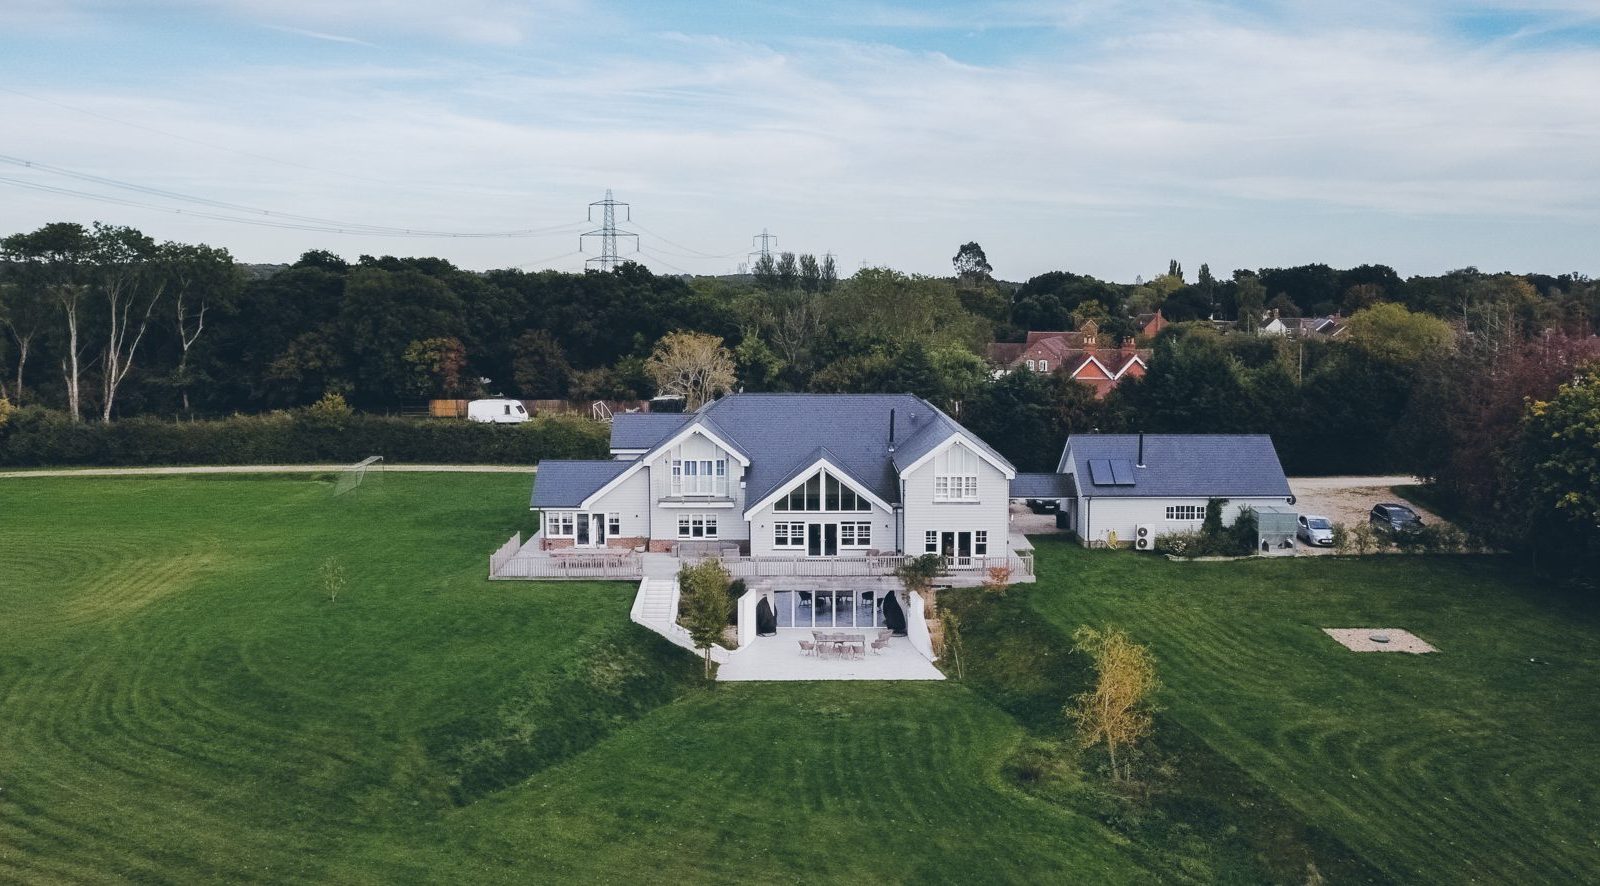  Meon Valley House - kate & tom's Large Holiday Homes